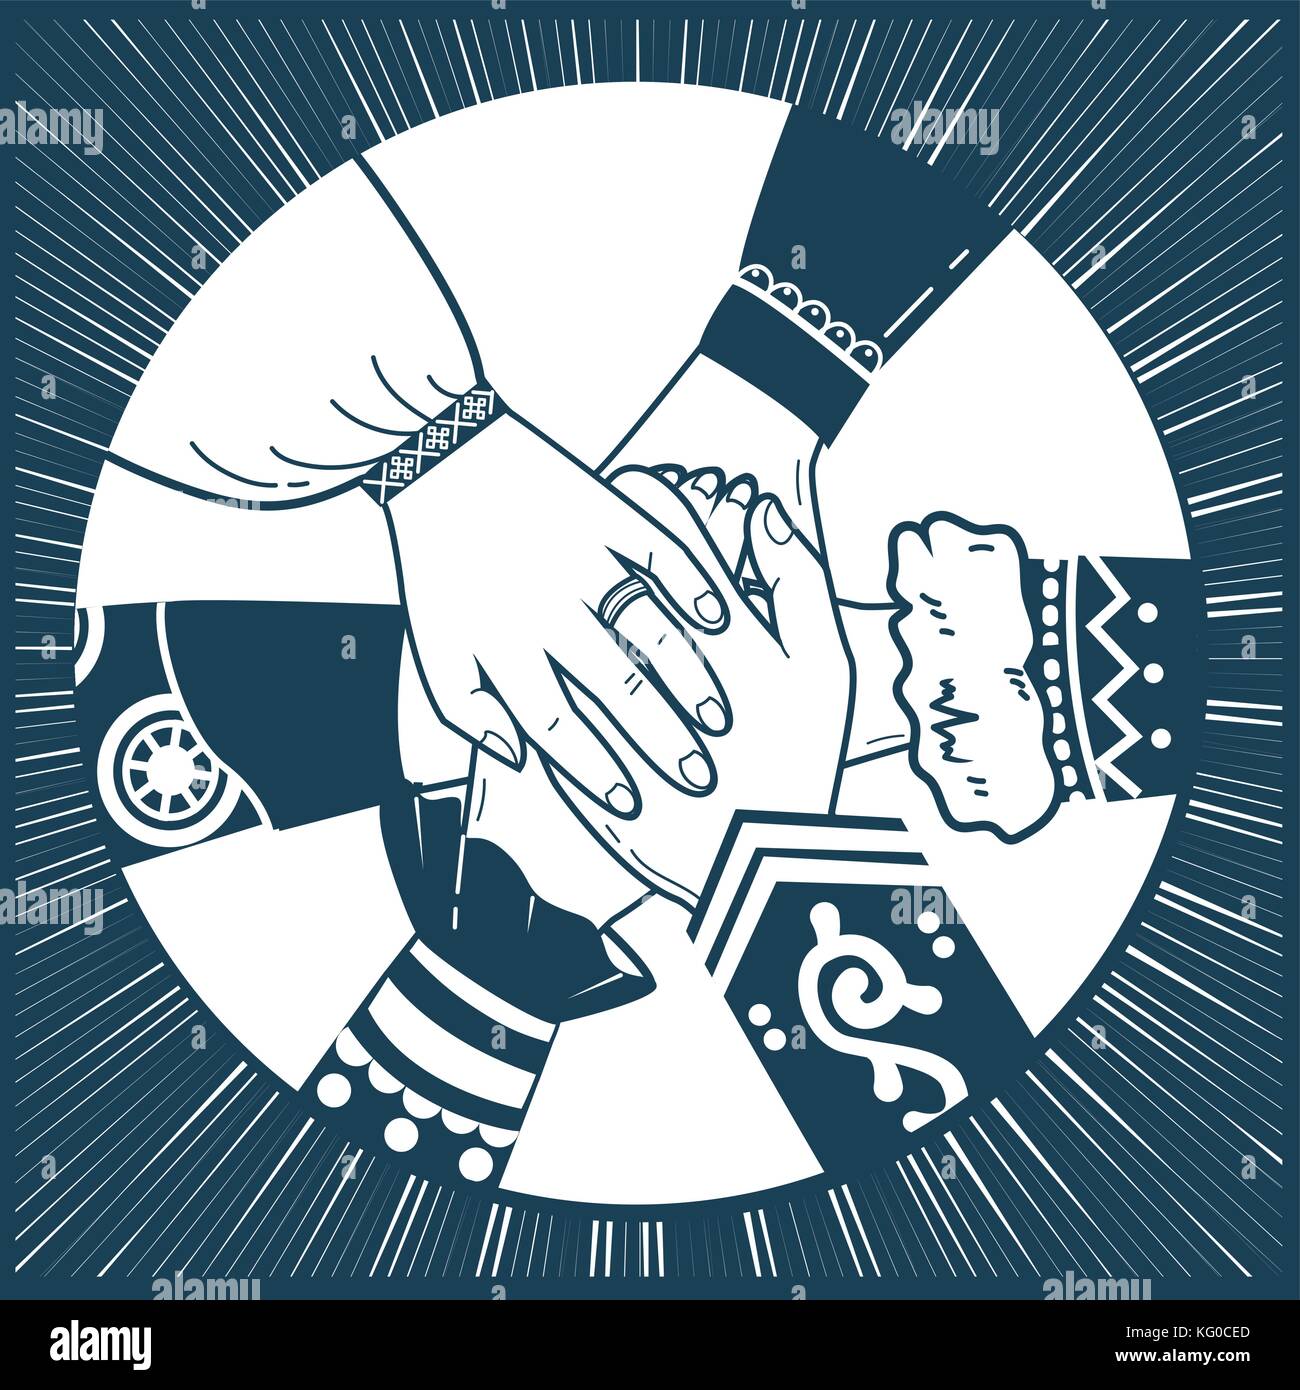 concept of unity, friendship, solidarity of the people in the form of hands that in the form of people in national costumes making pile of hands.  bla Stock Vector